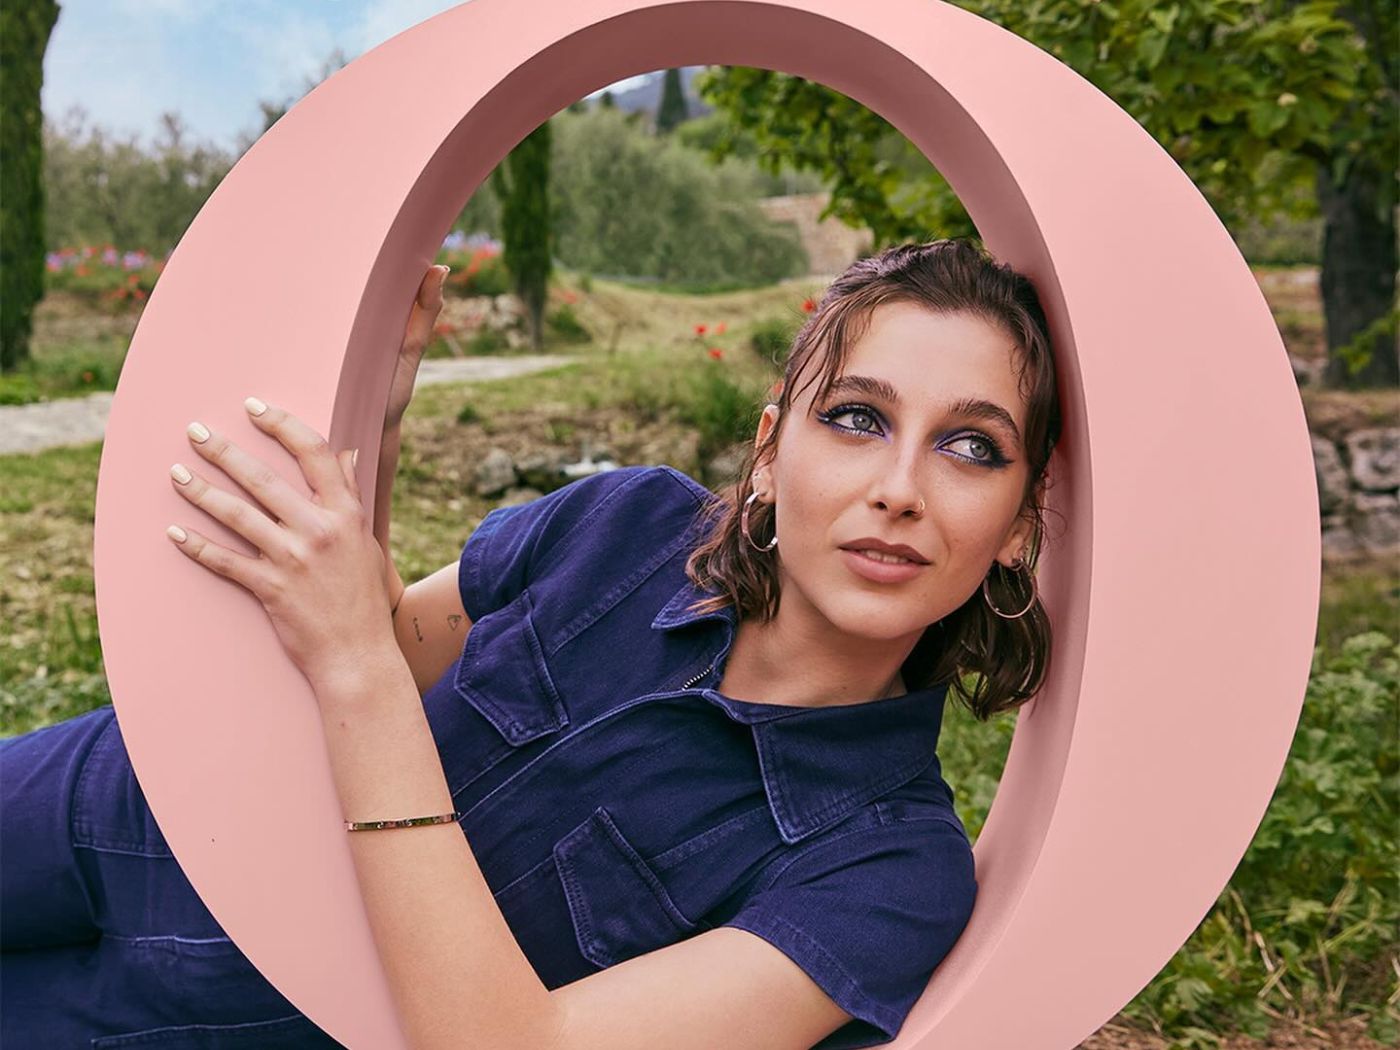 Girl in denim jumpsuit poses inside a giant pink letter "O" on grass.